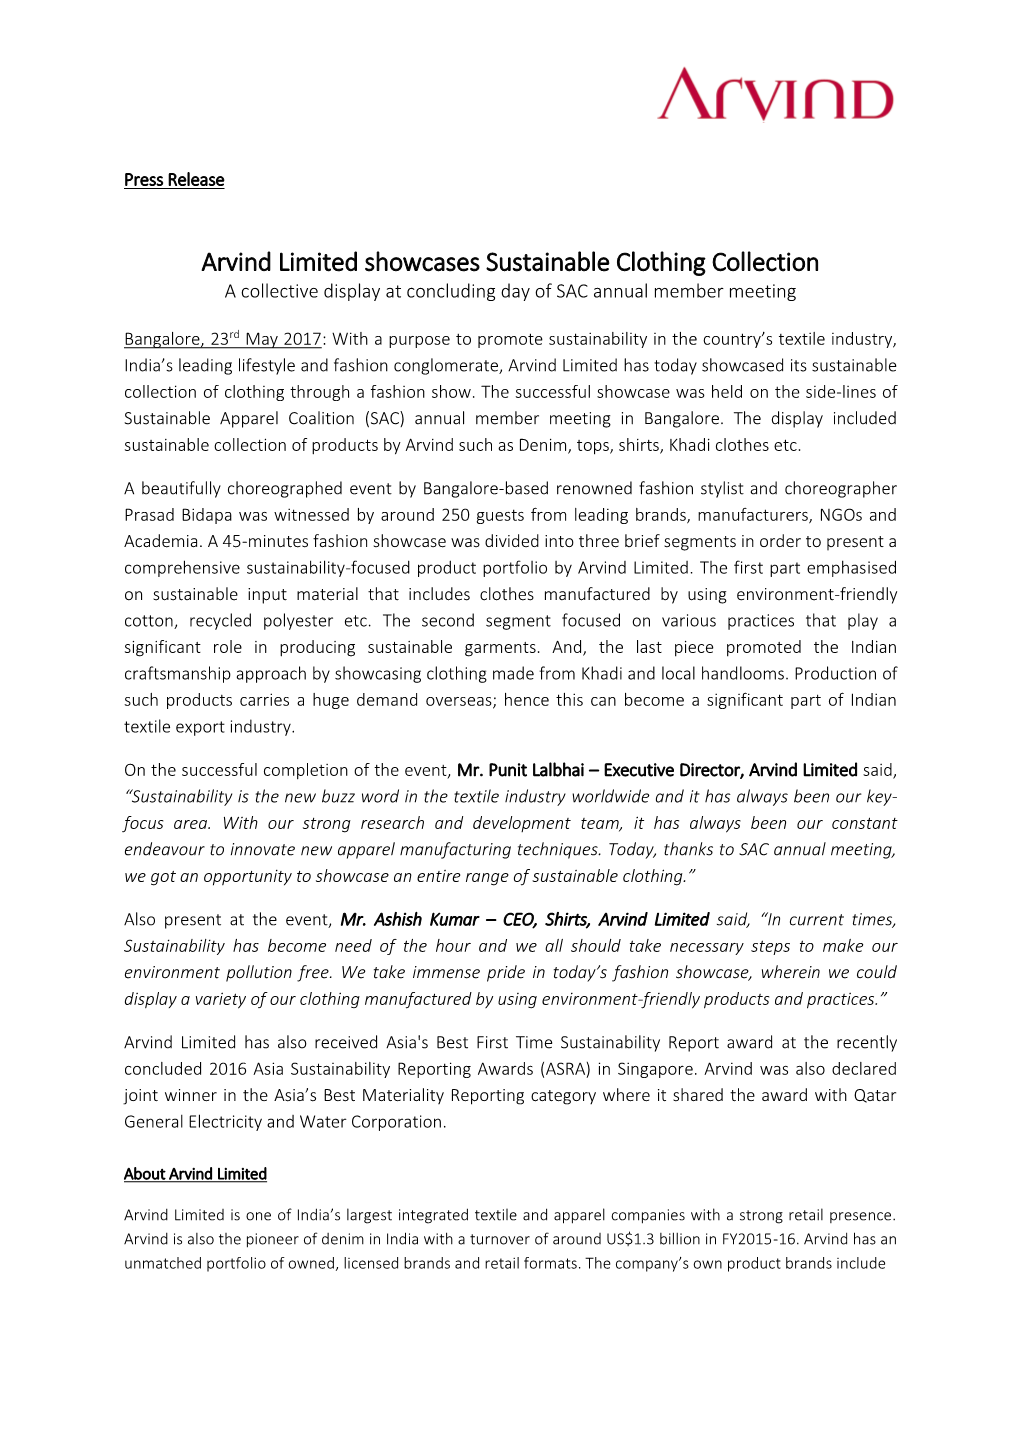 Arvind Limited Showcases Sustainable Clothing Collection a Collective Display at Concluding Day of SAC Annual Member Meeting